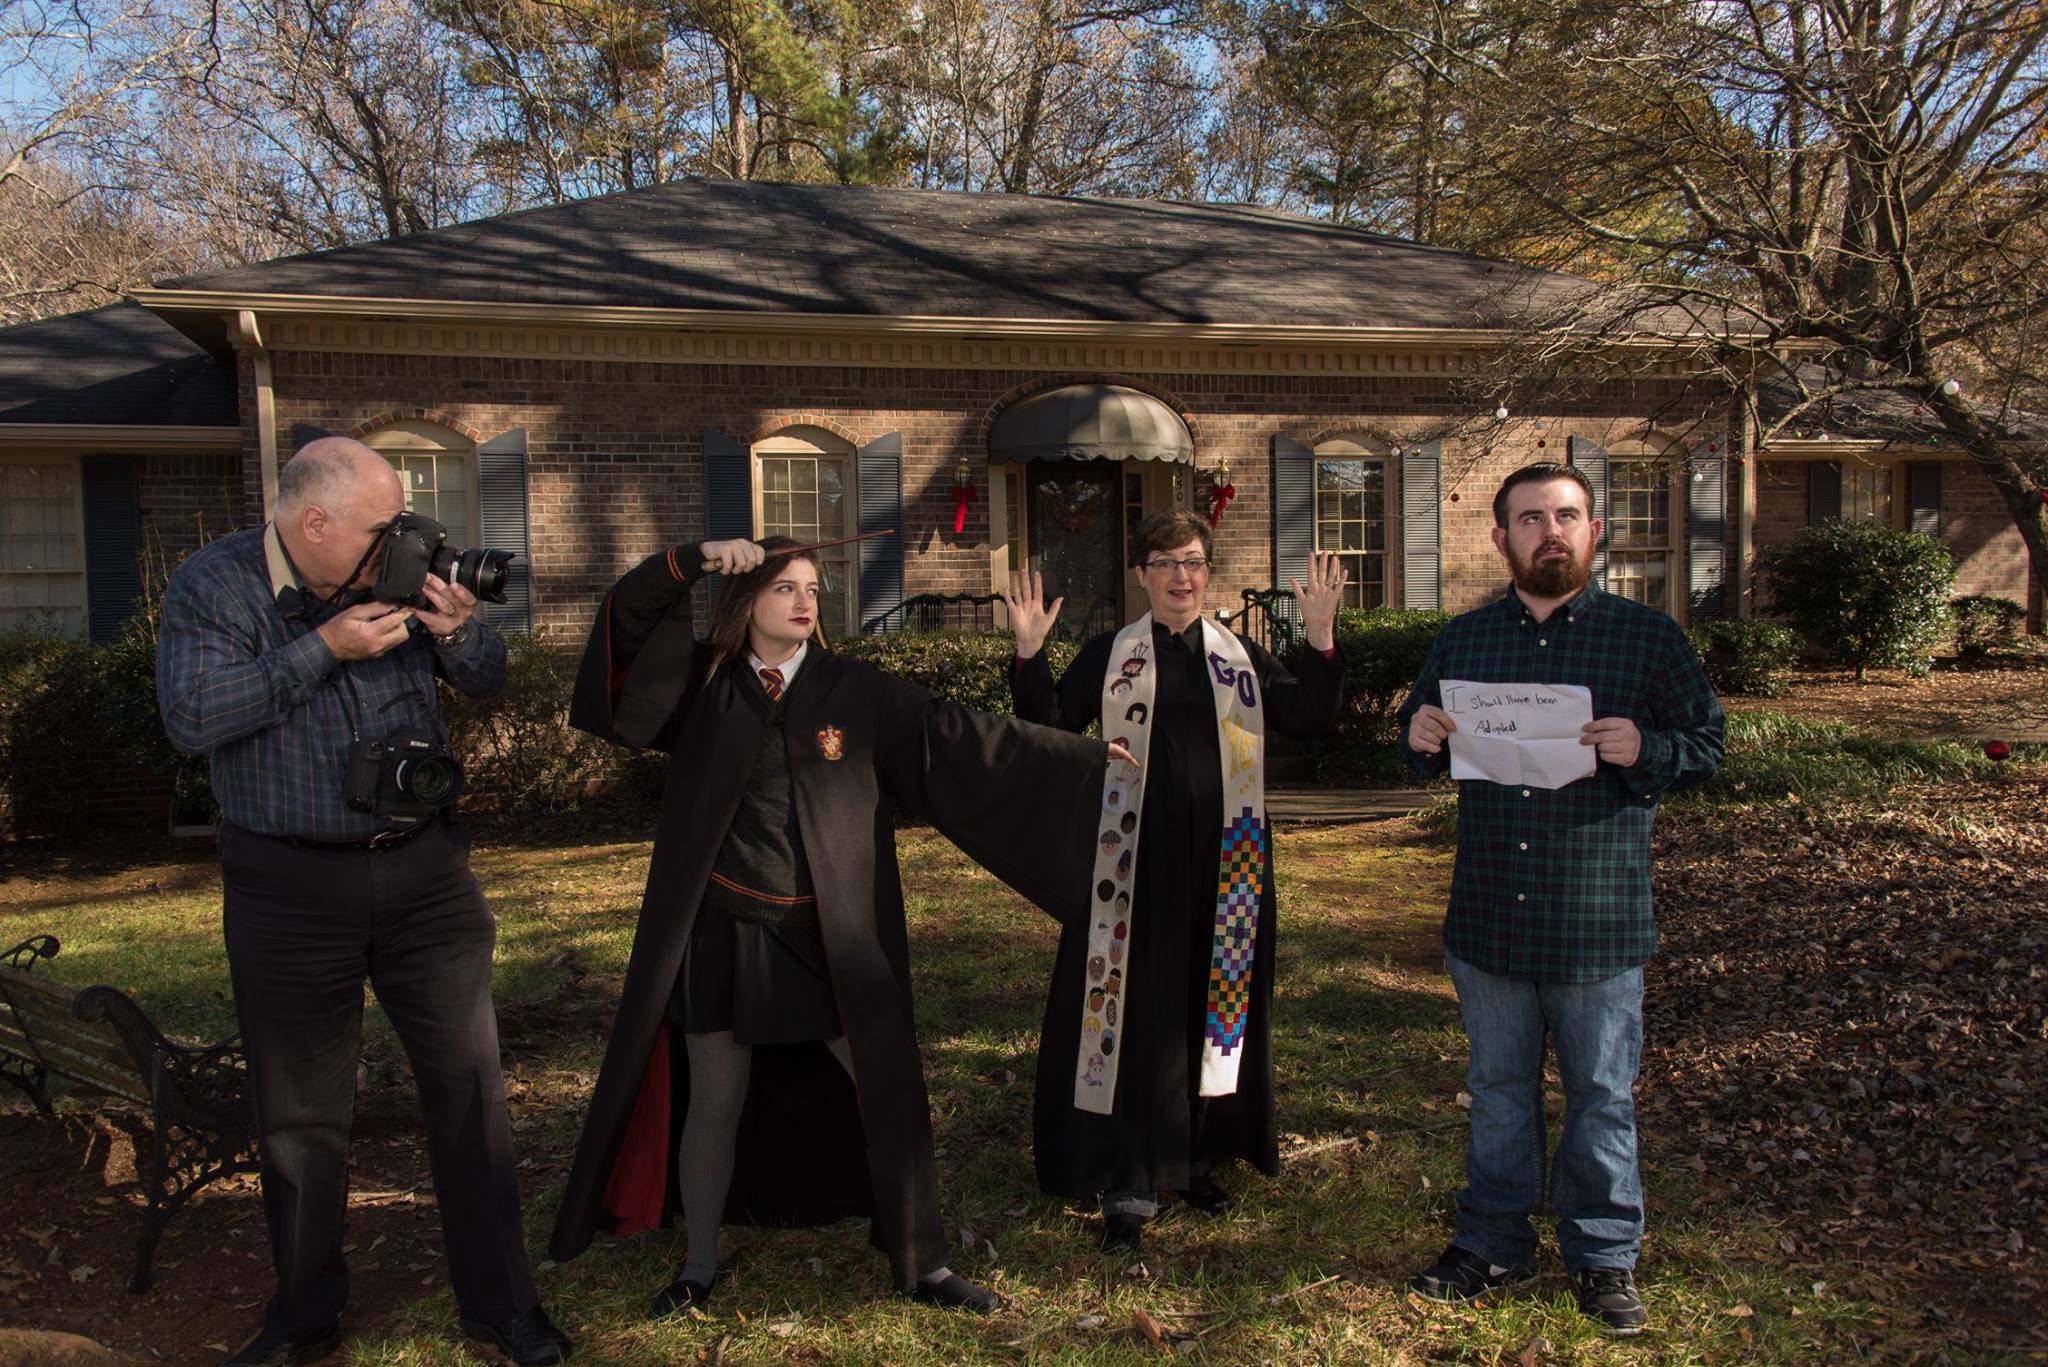 The front of our annual Christmas card this year featured our daughter in her Hogwarts robe casting a spell on her brother, while I, in my clerical robe and stole, held up my hands to stop her and Stanley documented the action with his camera. A totally silly photo. Taylor's sign reads, "I should have been adopted." since he is always shaking his head at our silly antics.